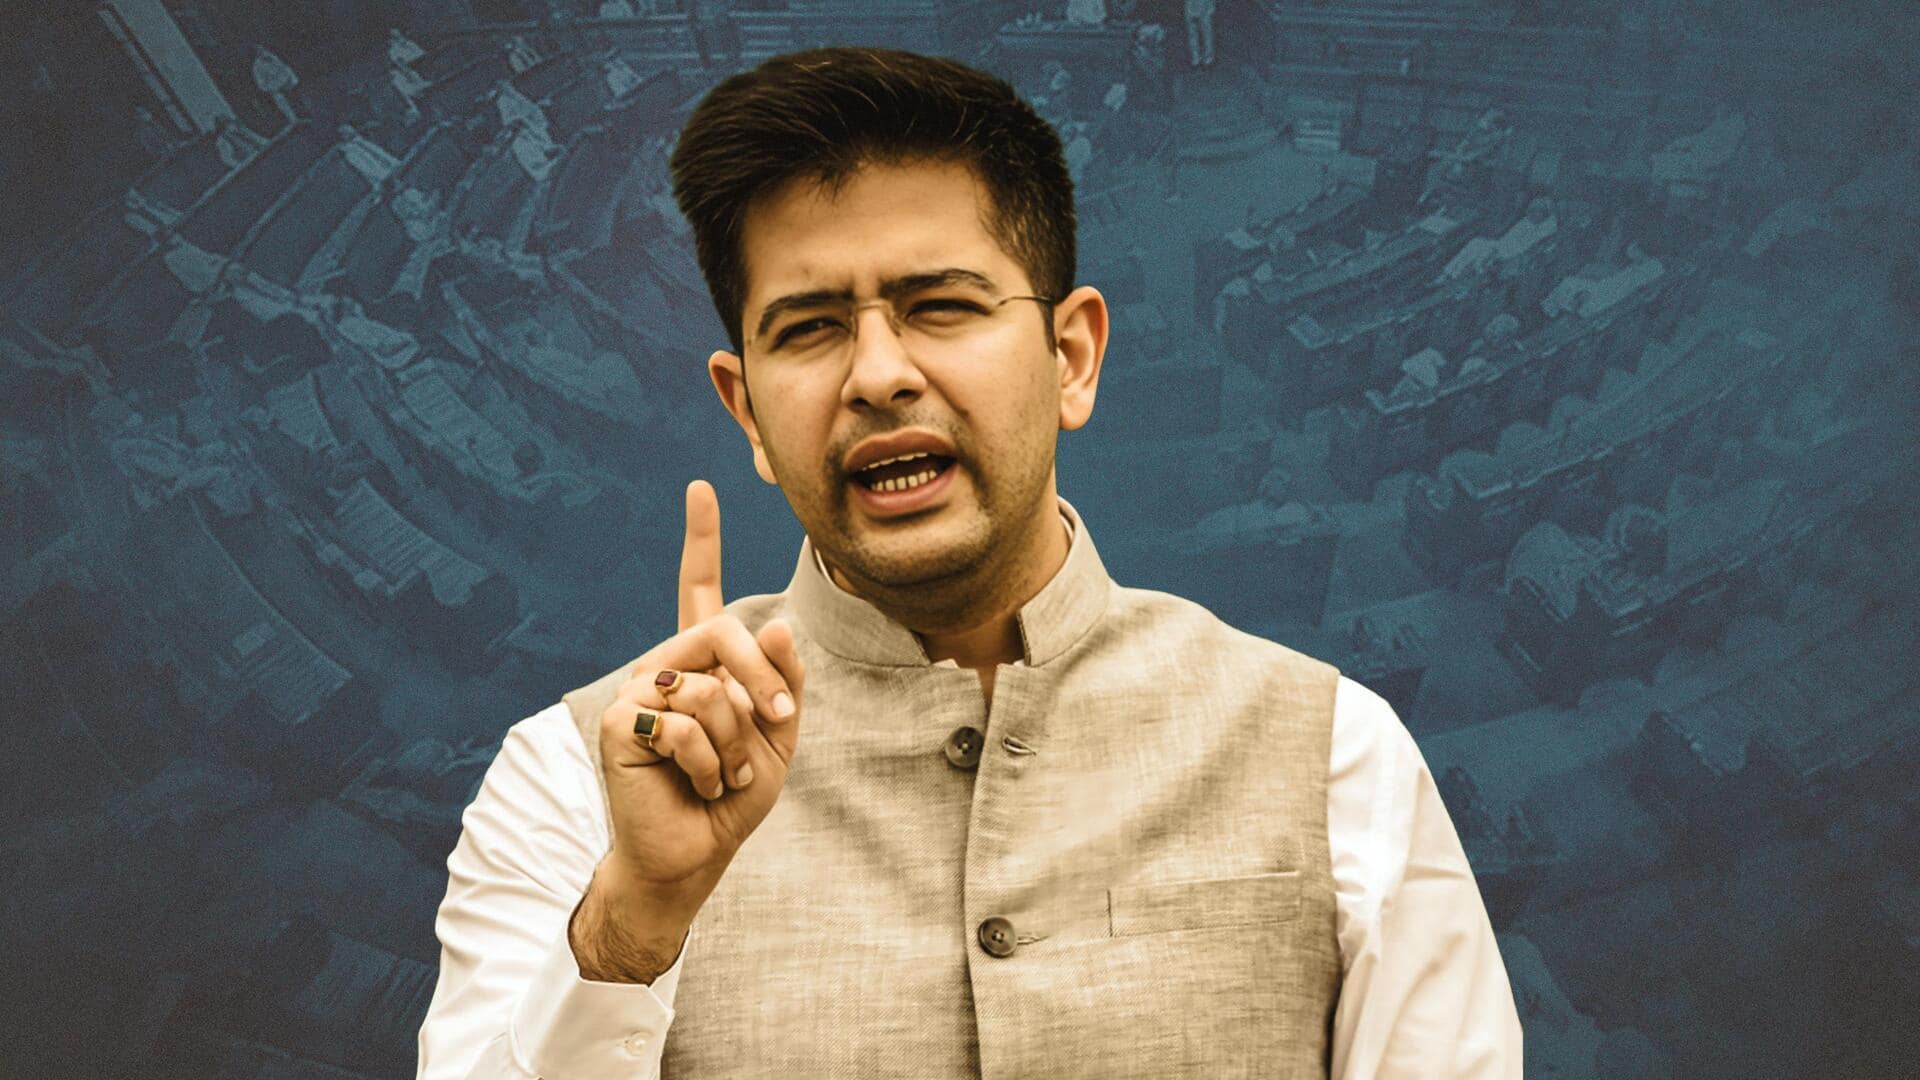 AAP's Raghav Chadha won't have to vacate government bungalow: HC